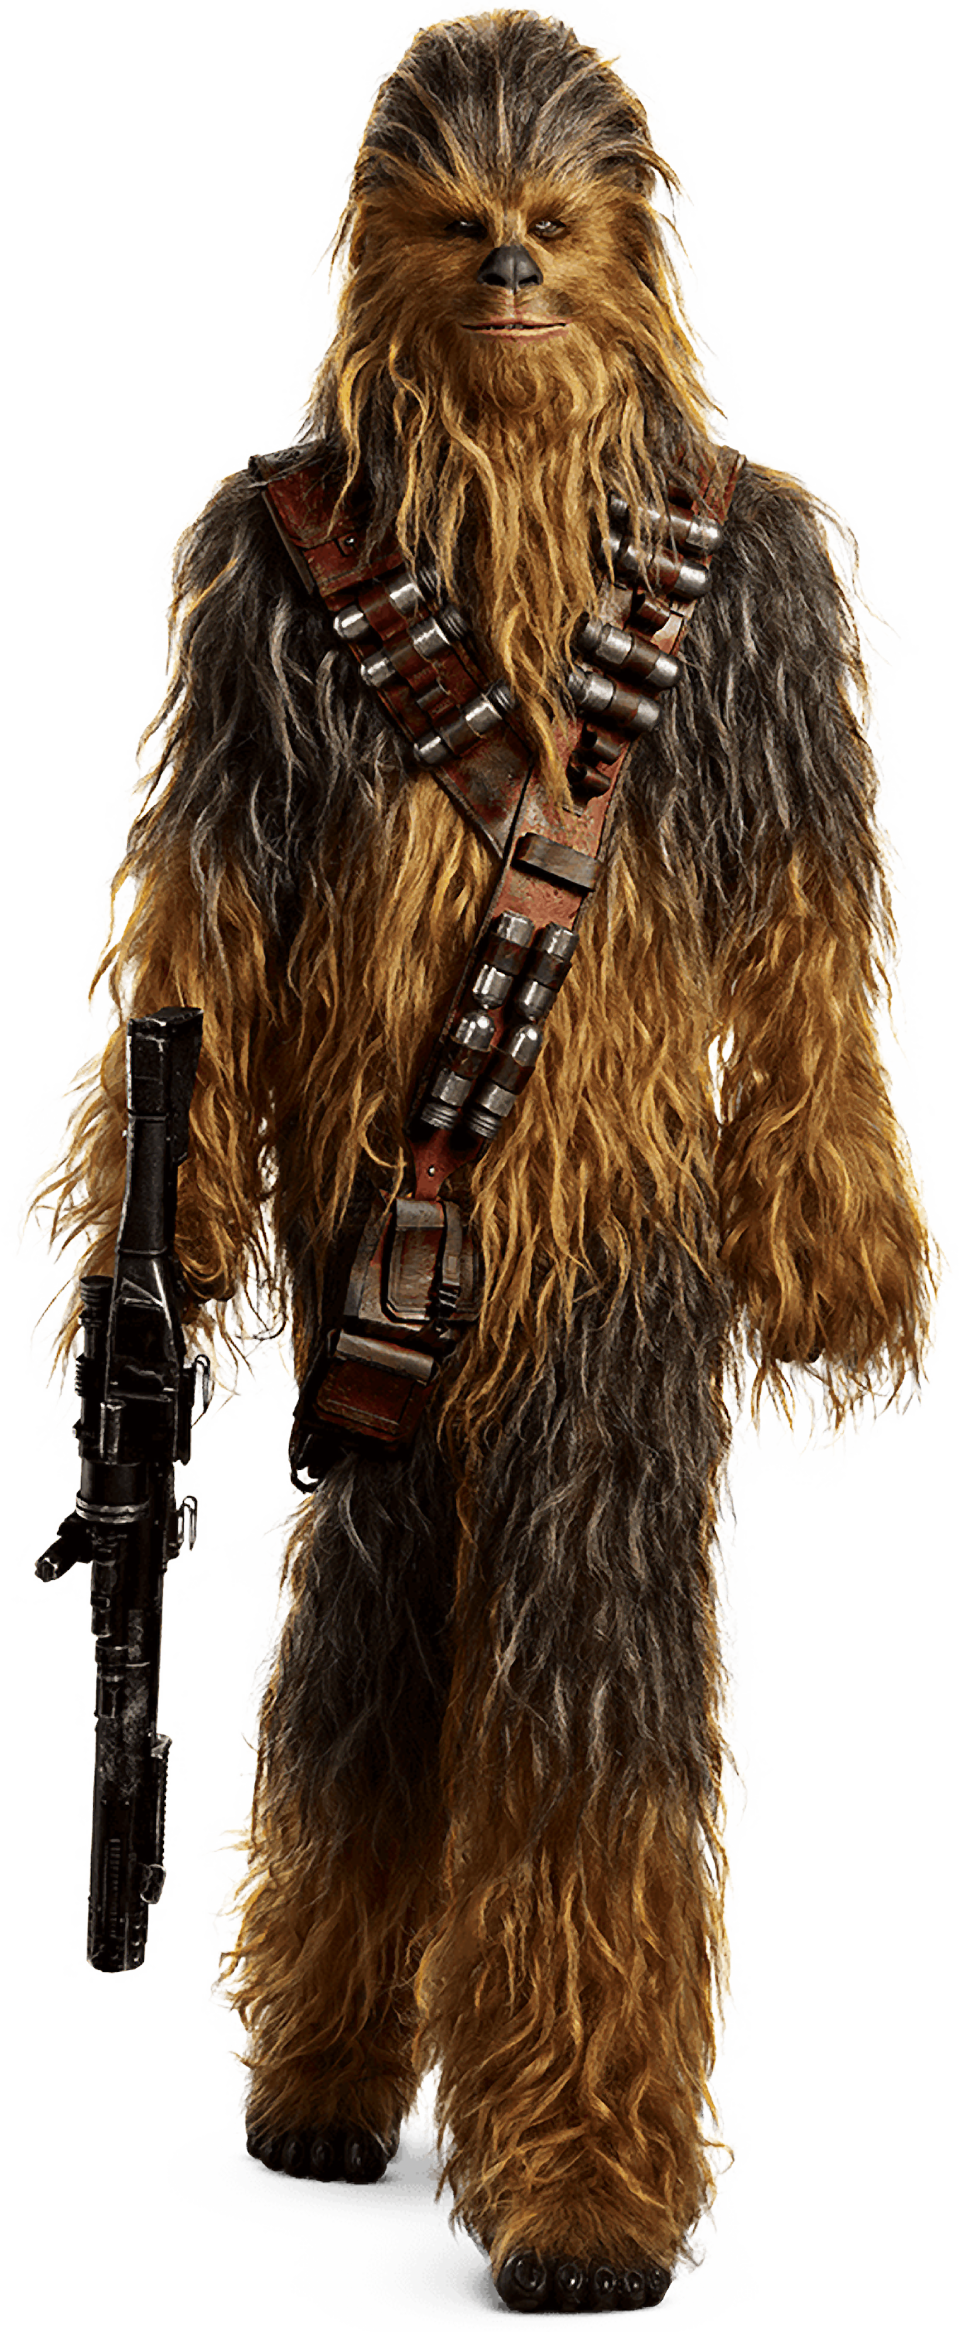 Characters Of Solo A Star Wars Story The Mighty Chewbacca